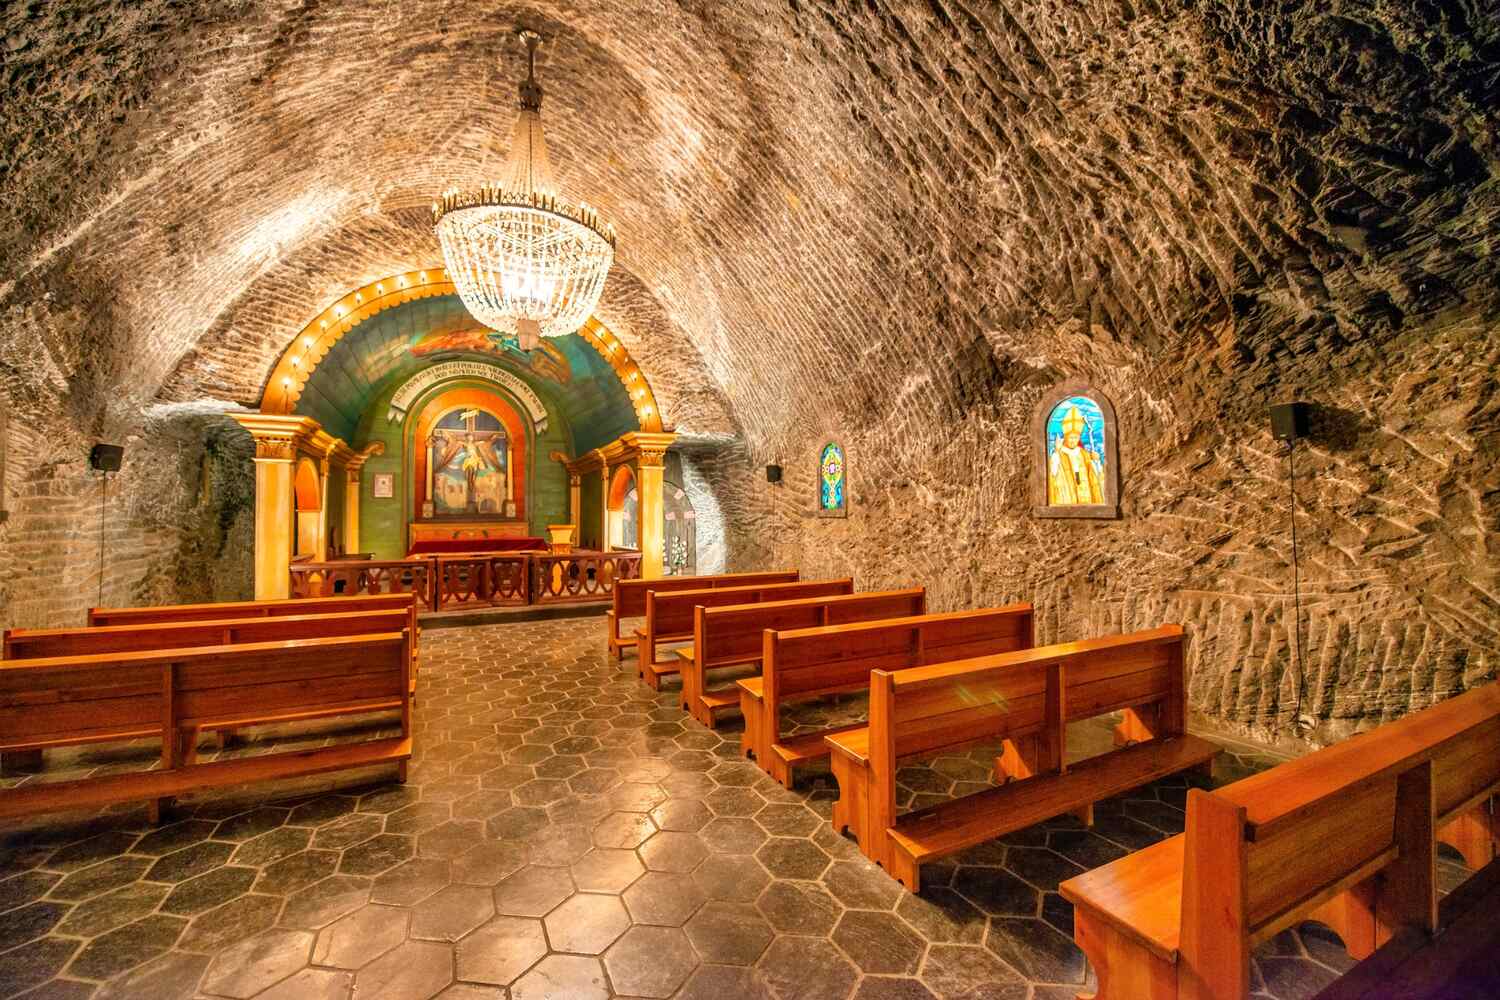 Underground chapel with benches and candles.